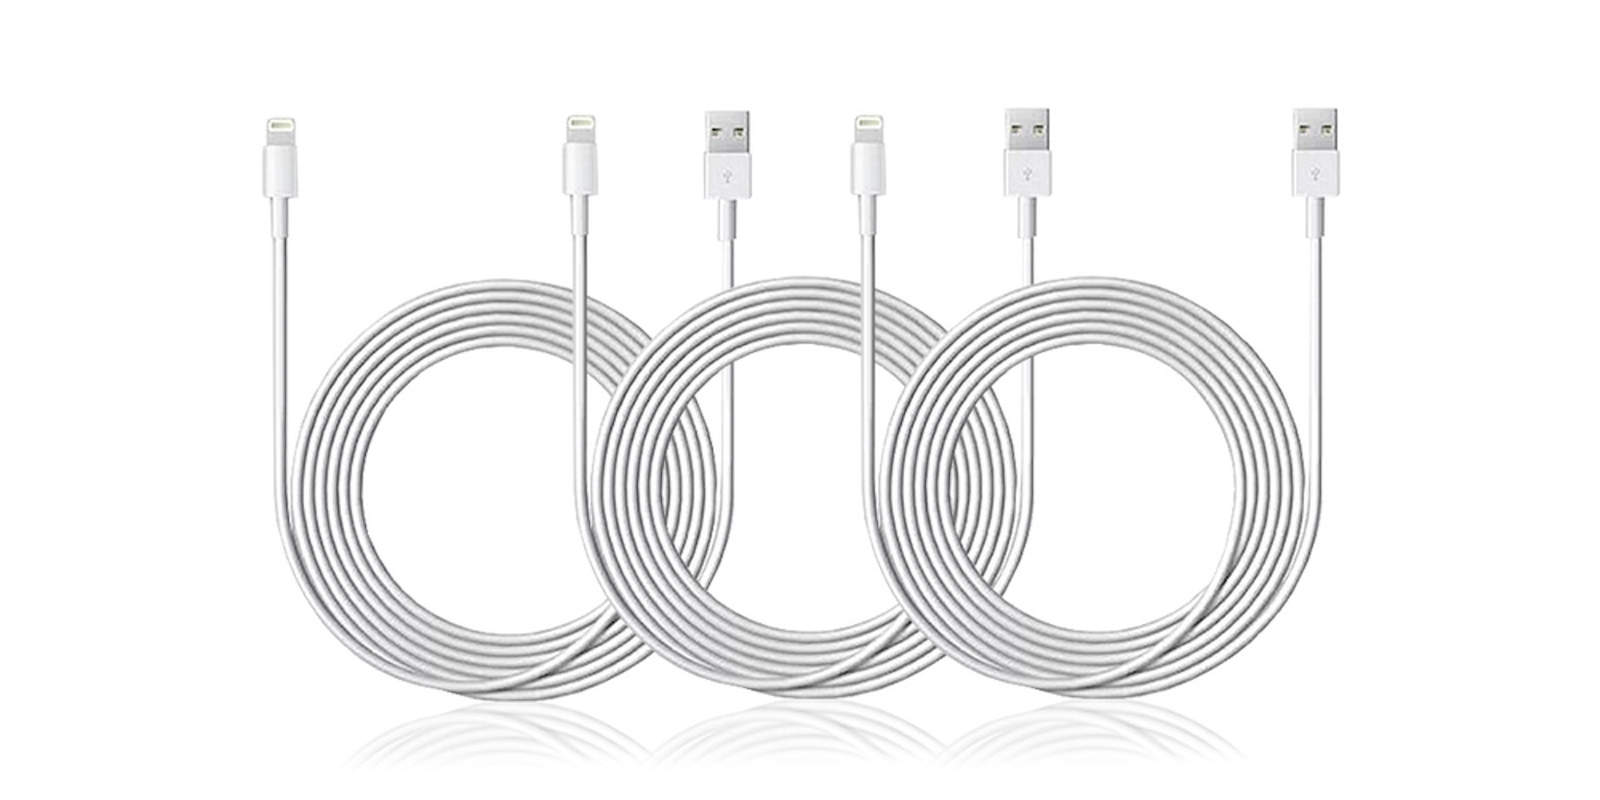 Get triple backup and extra reach for your iPhone's lifeline with this bundle of MFi-certified Lightning cables.